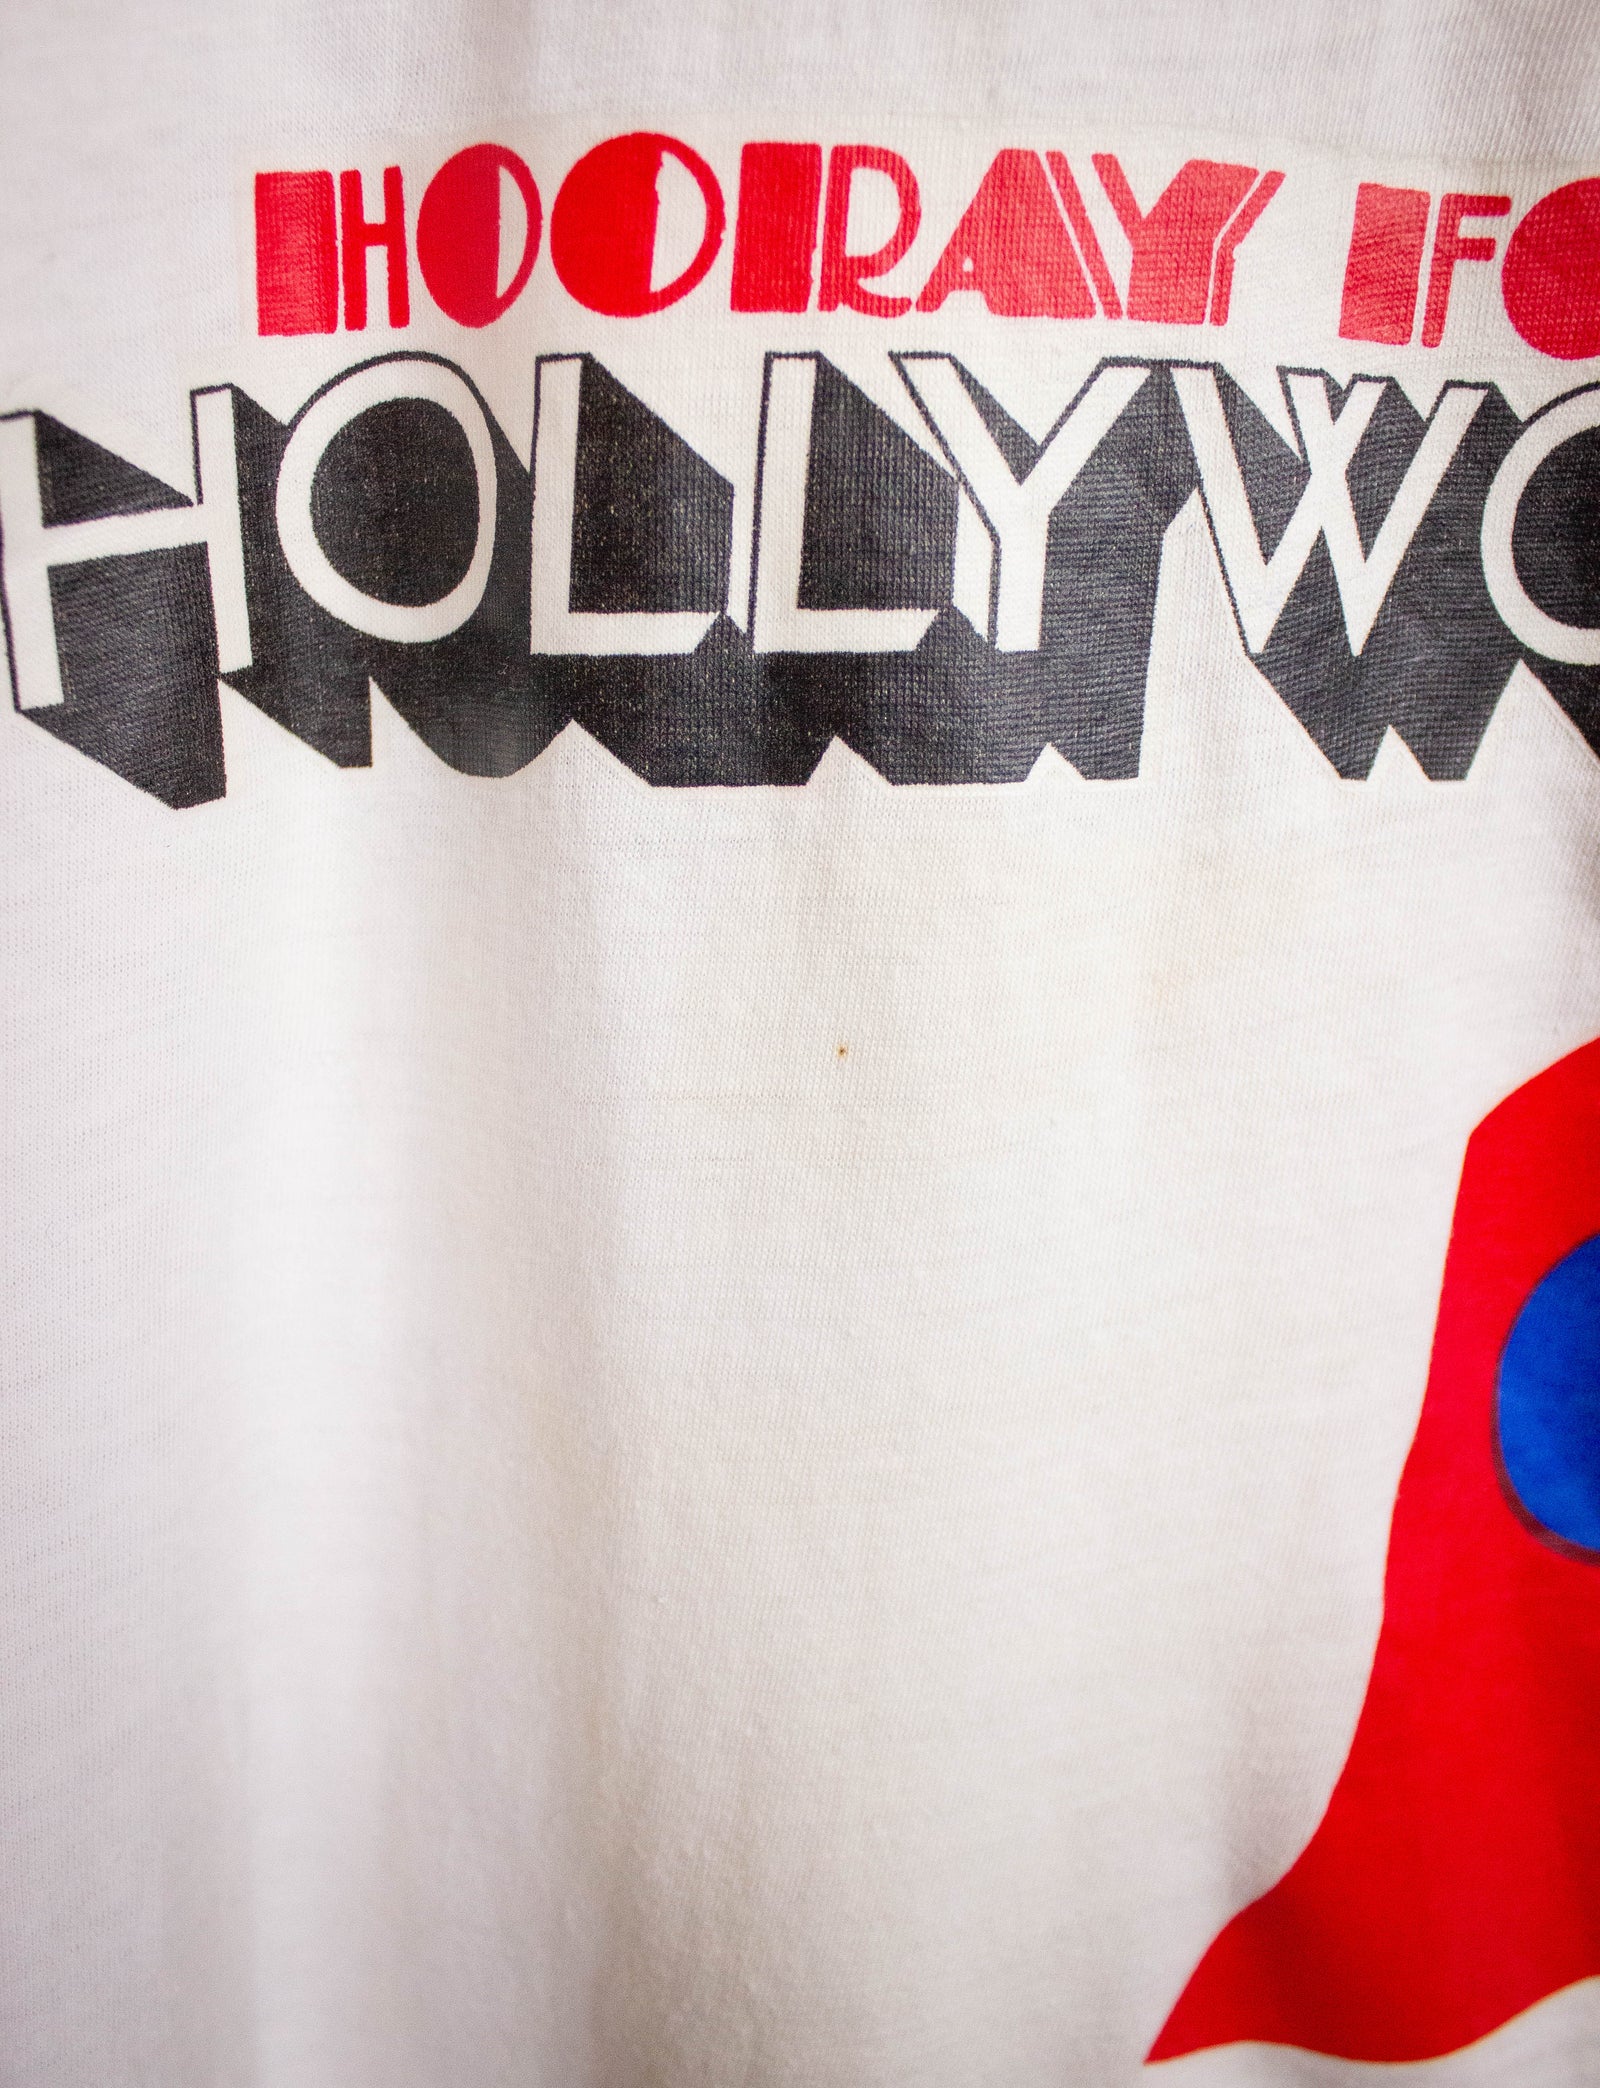 Vintage Hooray For Hollywood Graphic T-Shirt S